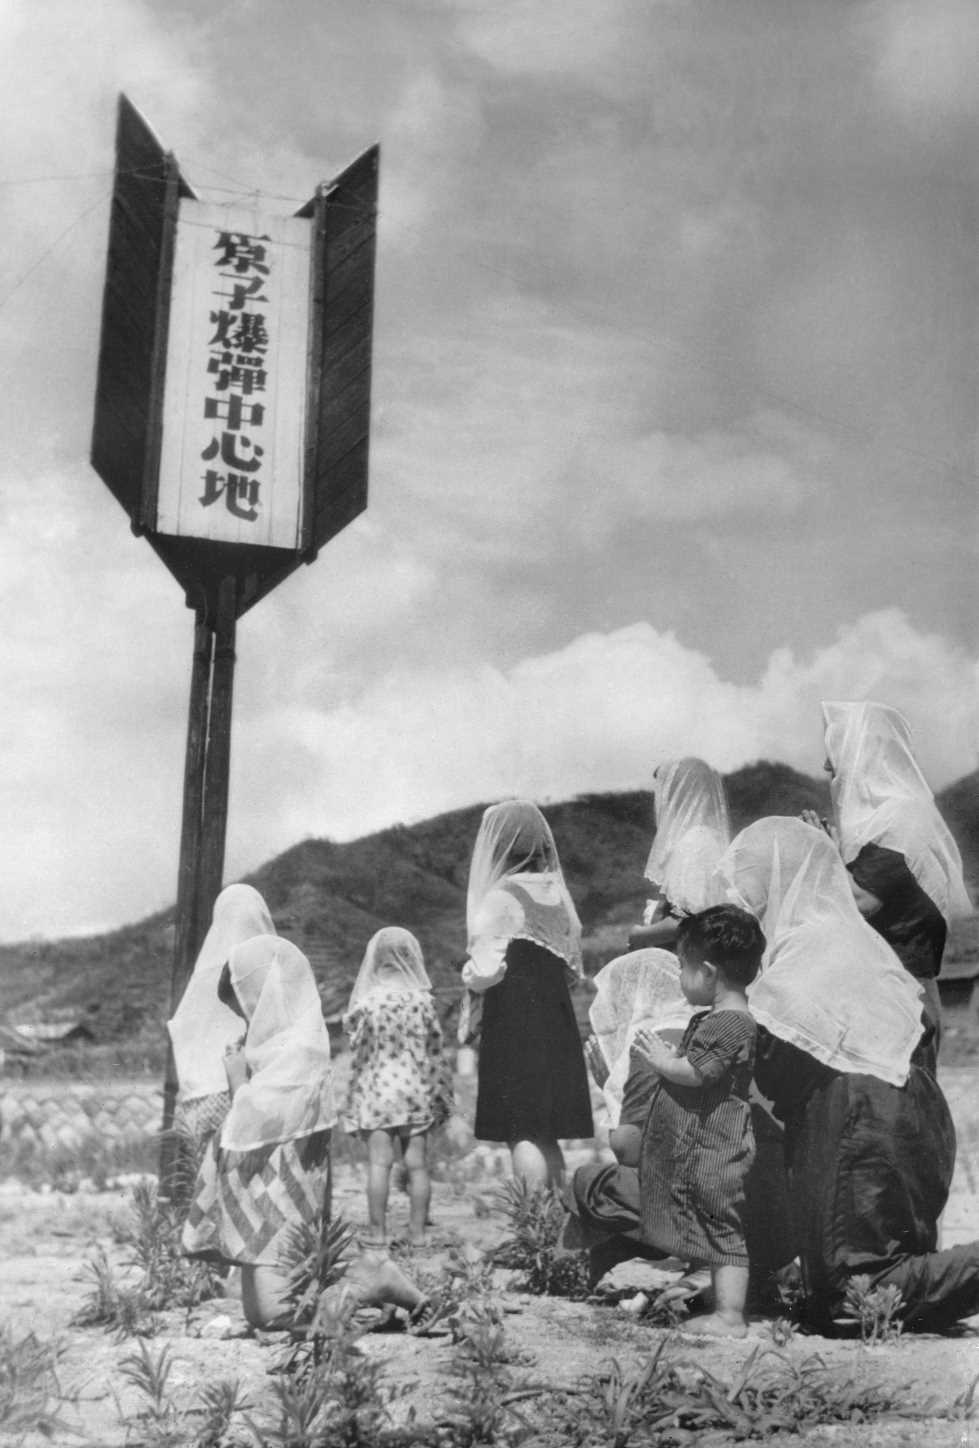 Catholics praying for peace at the epicenter. This photo was taken in 1947. (kyodo)